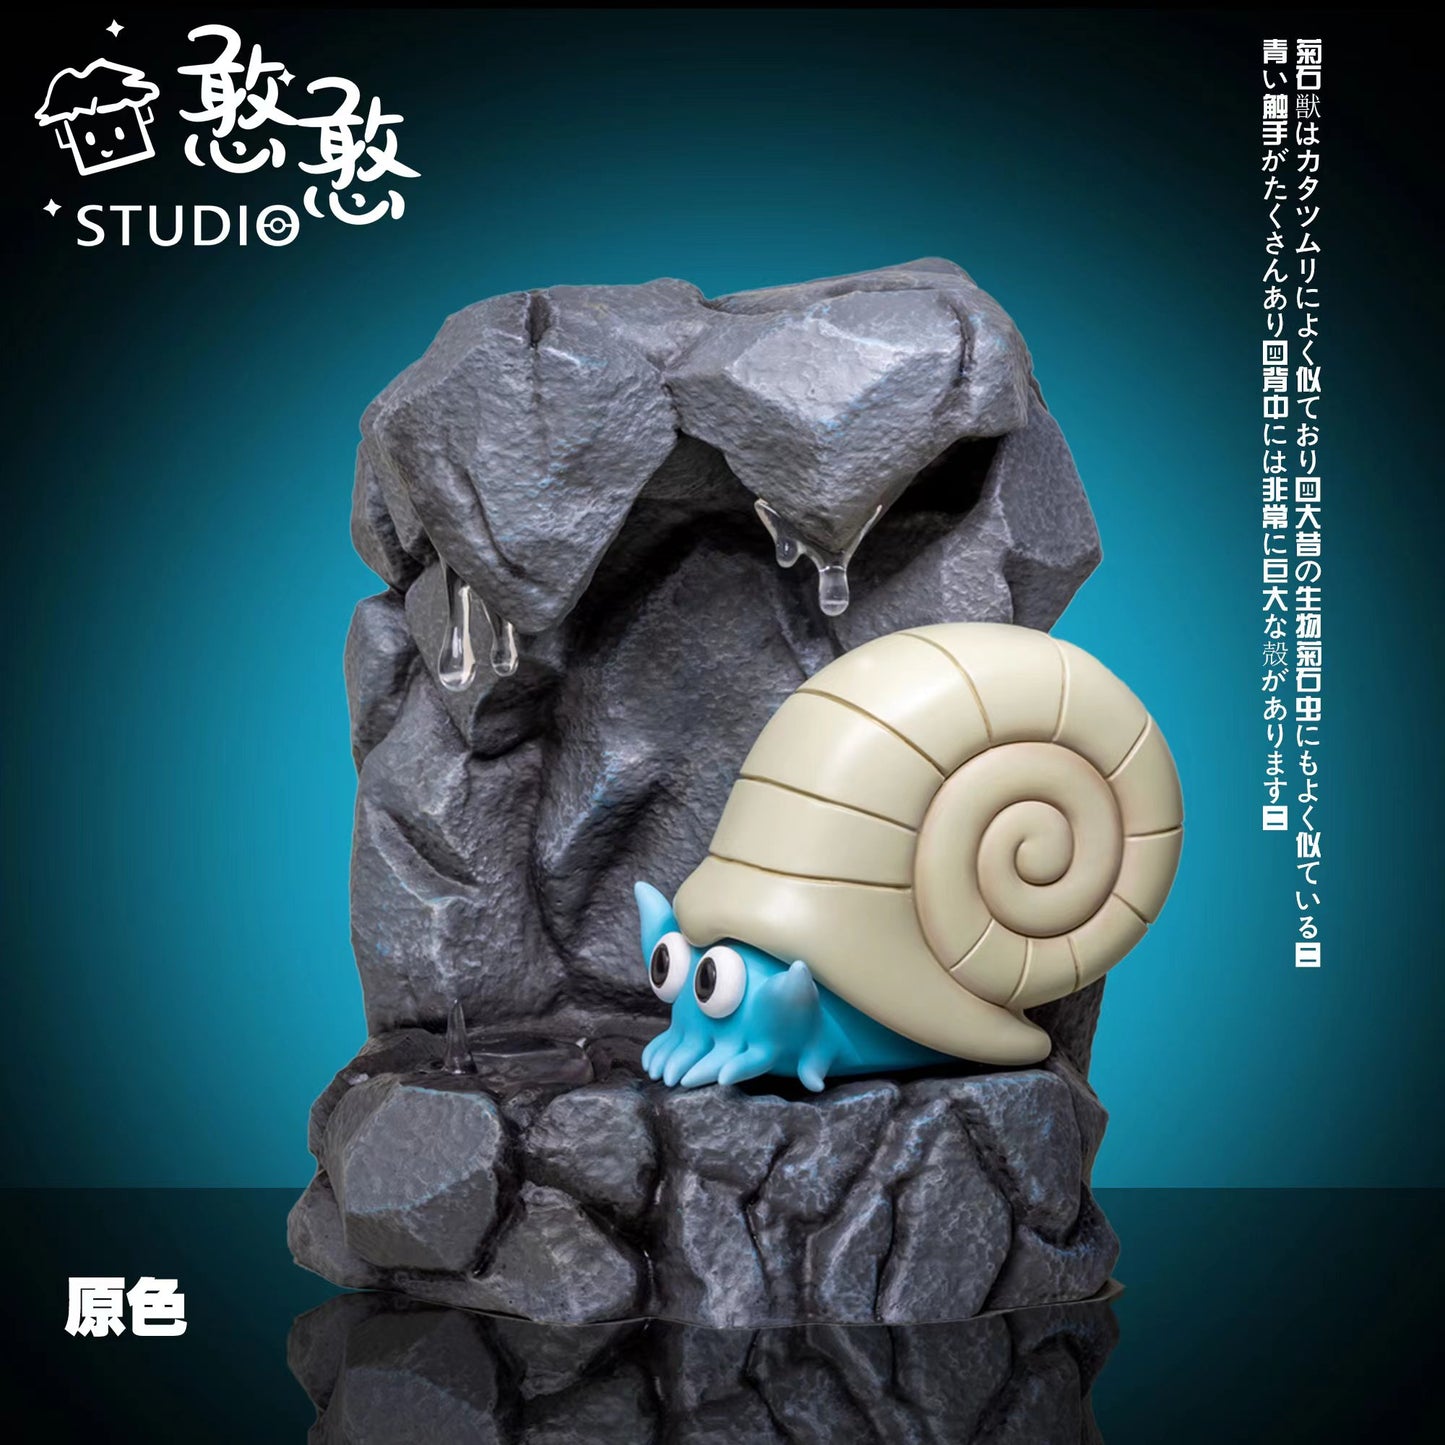 〖Sold Out〗Pokémon Peripheral Products Feelings series 01 Omanyte - HH Studio